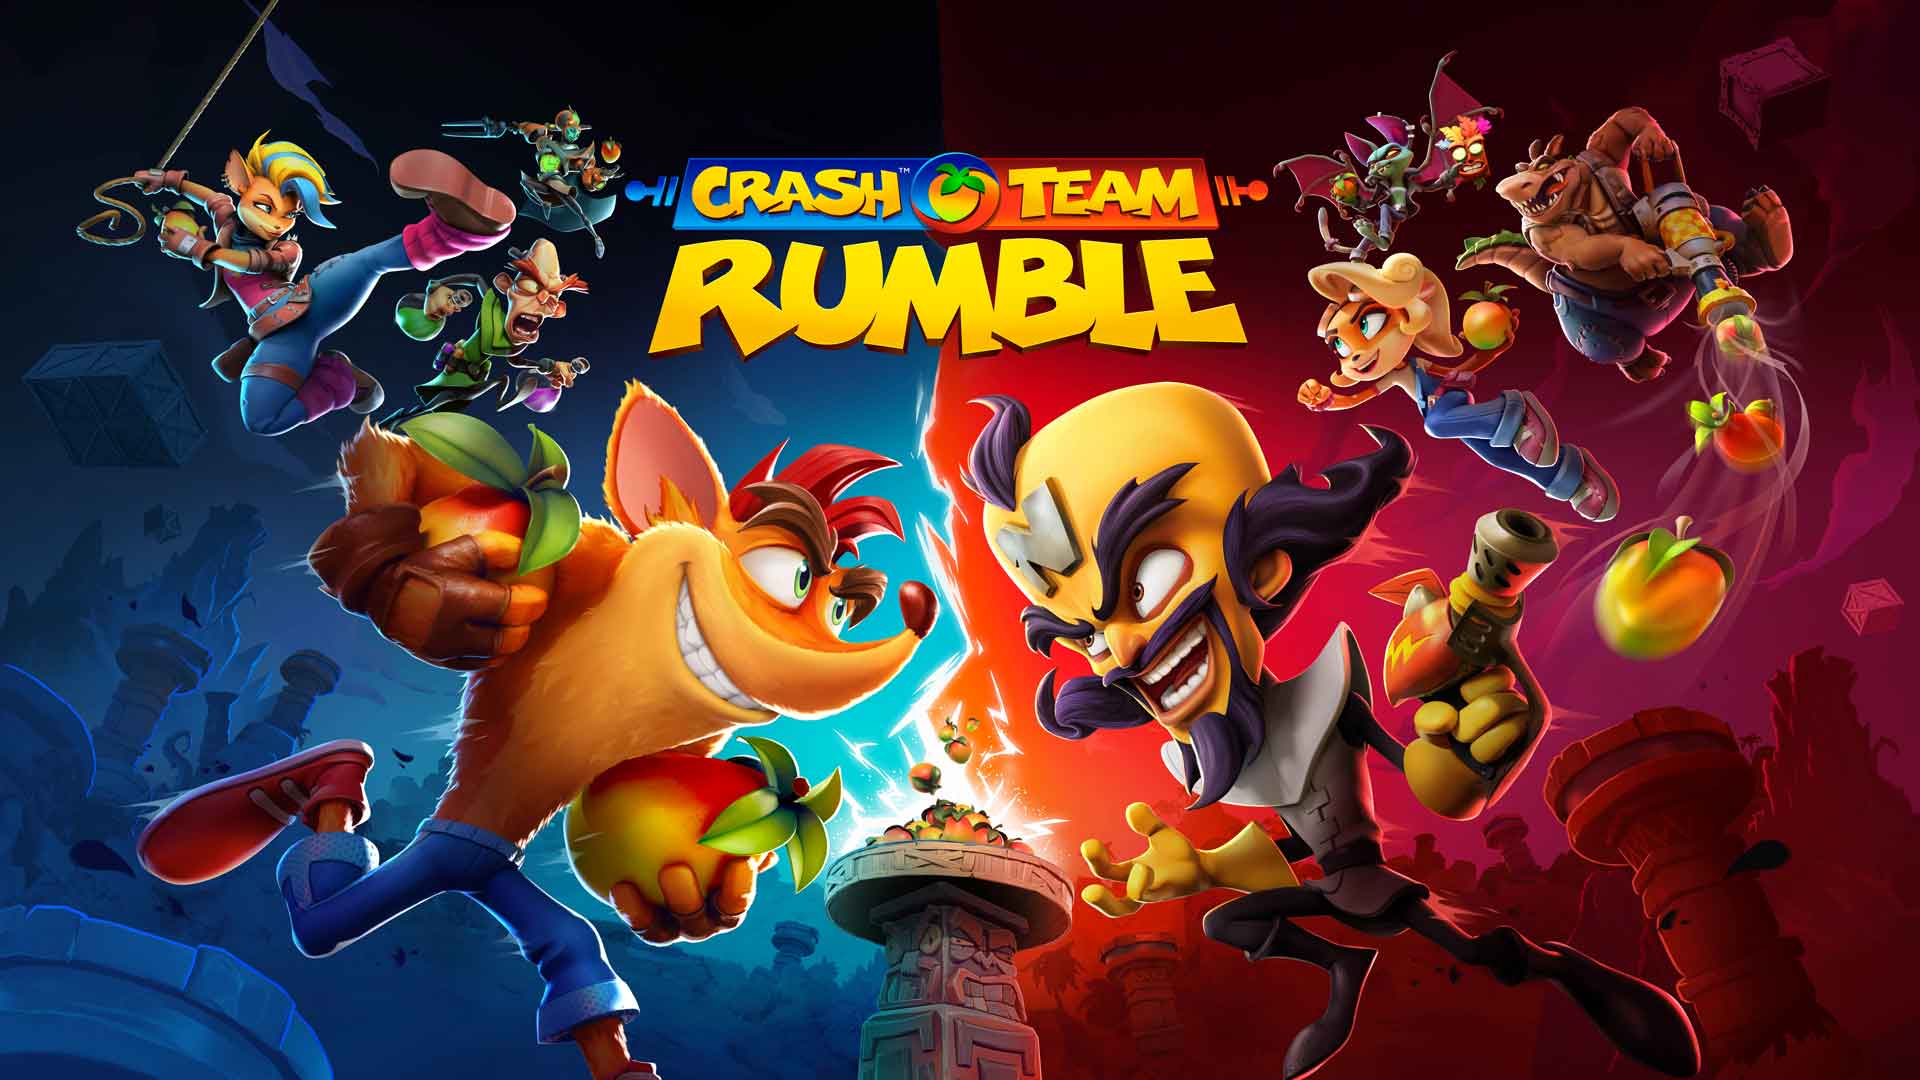 Crash Team Rumble™ — Coming Soon to Xbox and PlayStation